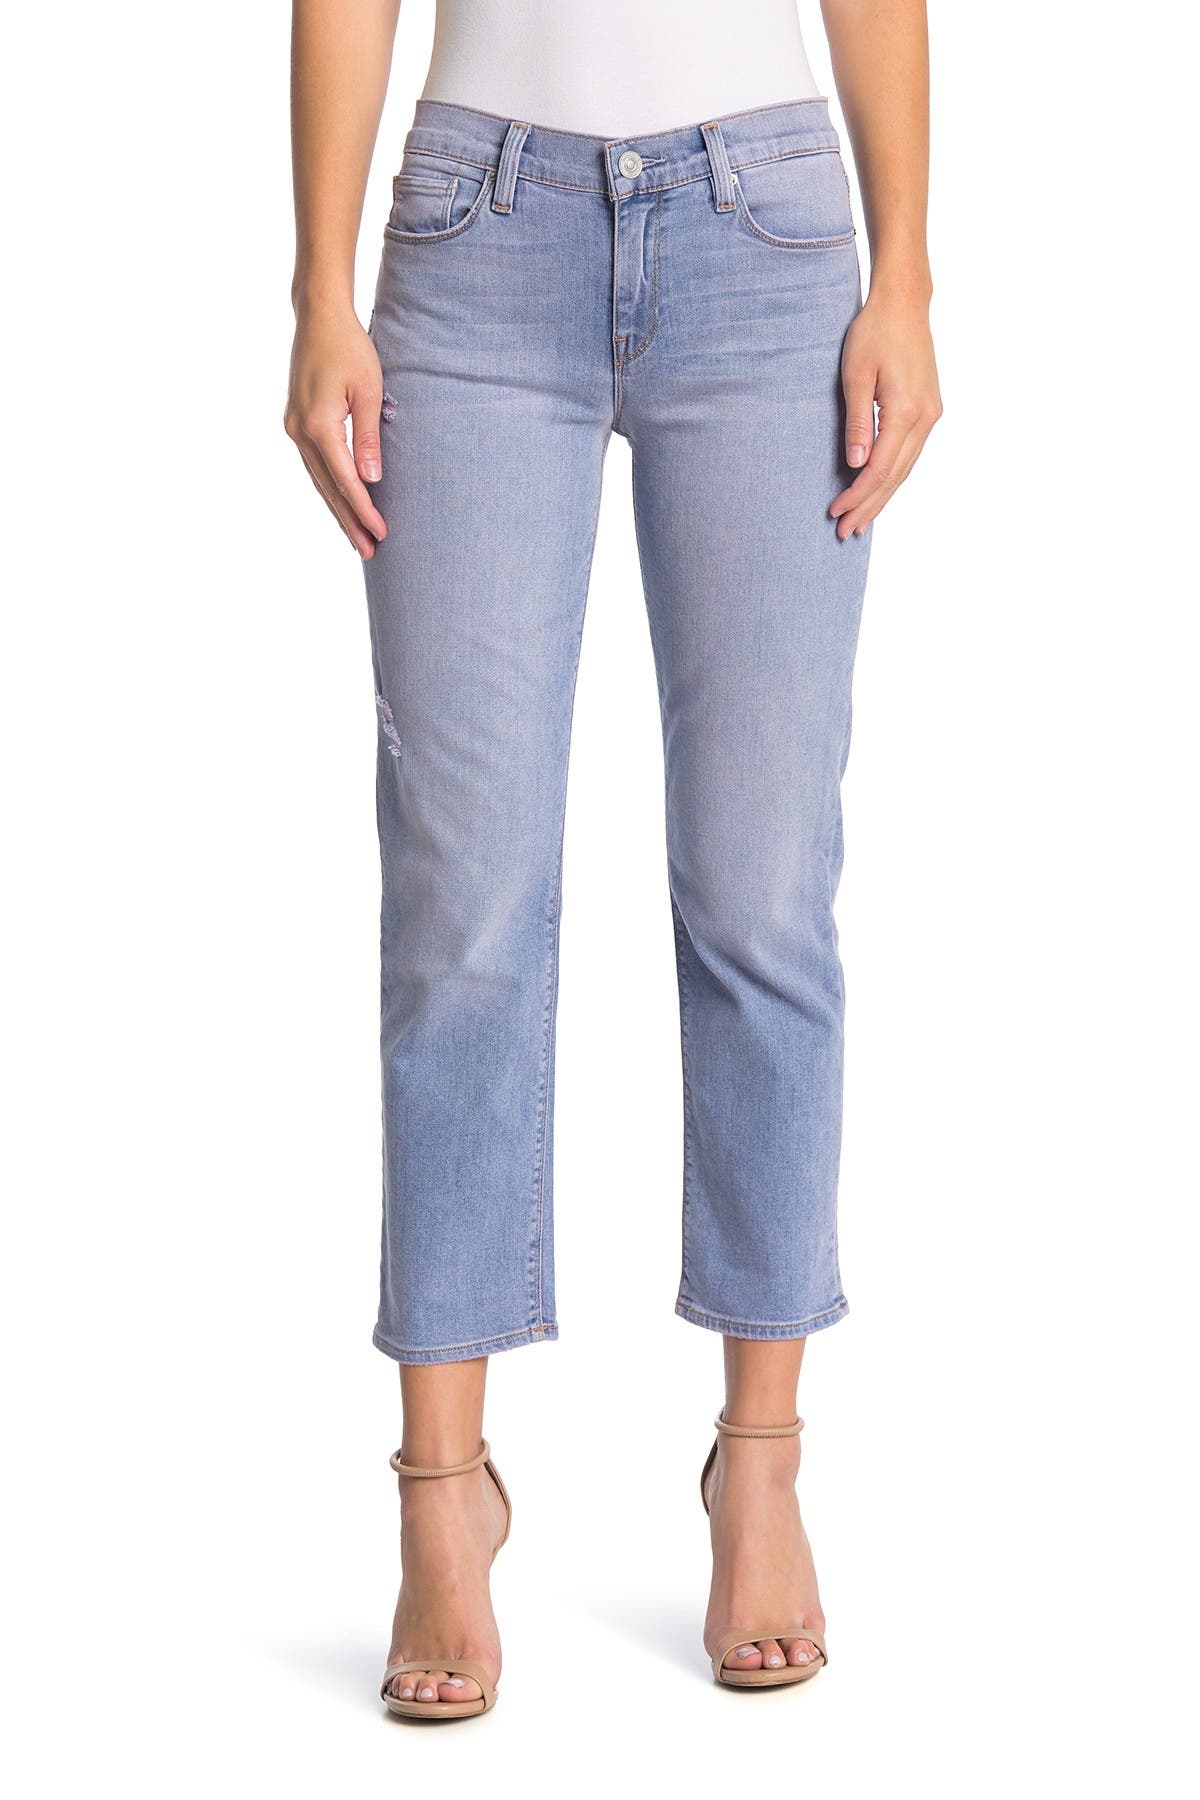 HUDSON Jeans | Nico Mid Rise Cropped 